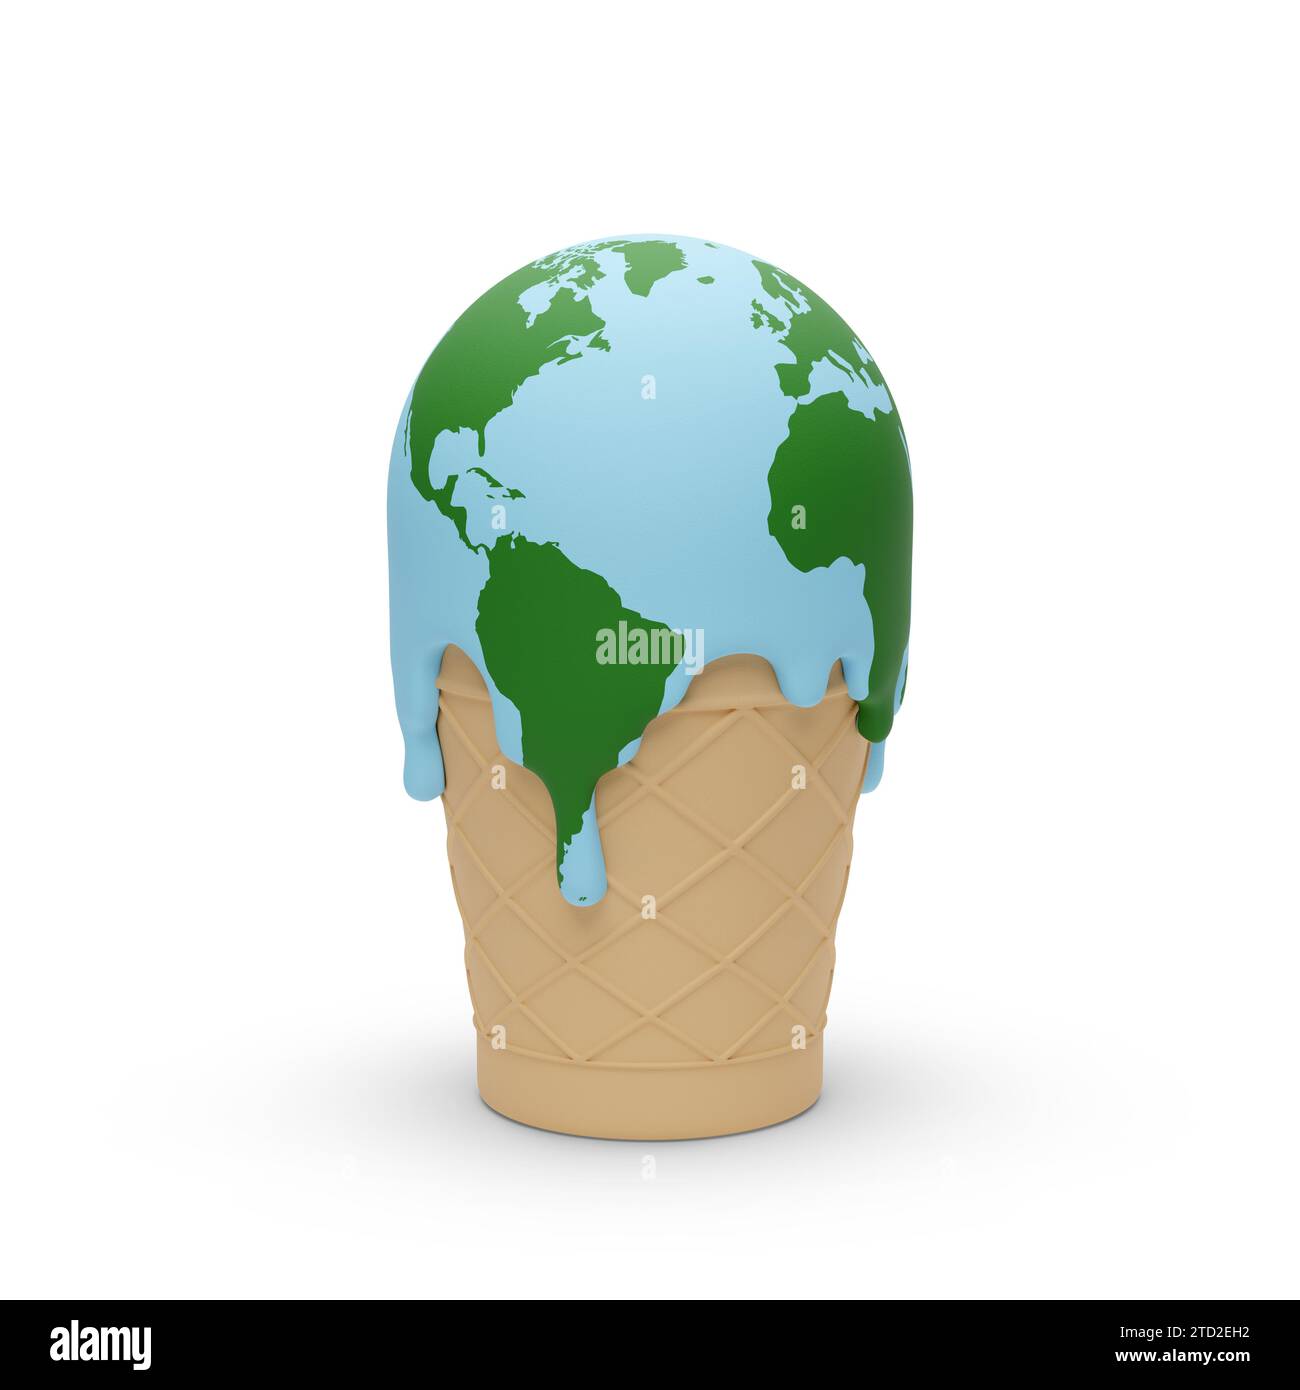 https://c8.alamy.com/comp/2TD2EH2/ice-cream-melting-in-the-shape-of-planet-earth-isolated-on-white-background-global-warming-concept-3d-illustration-2TD2EH2.jpg